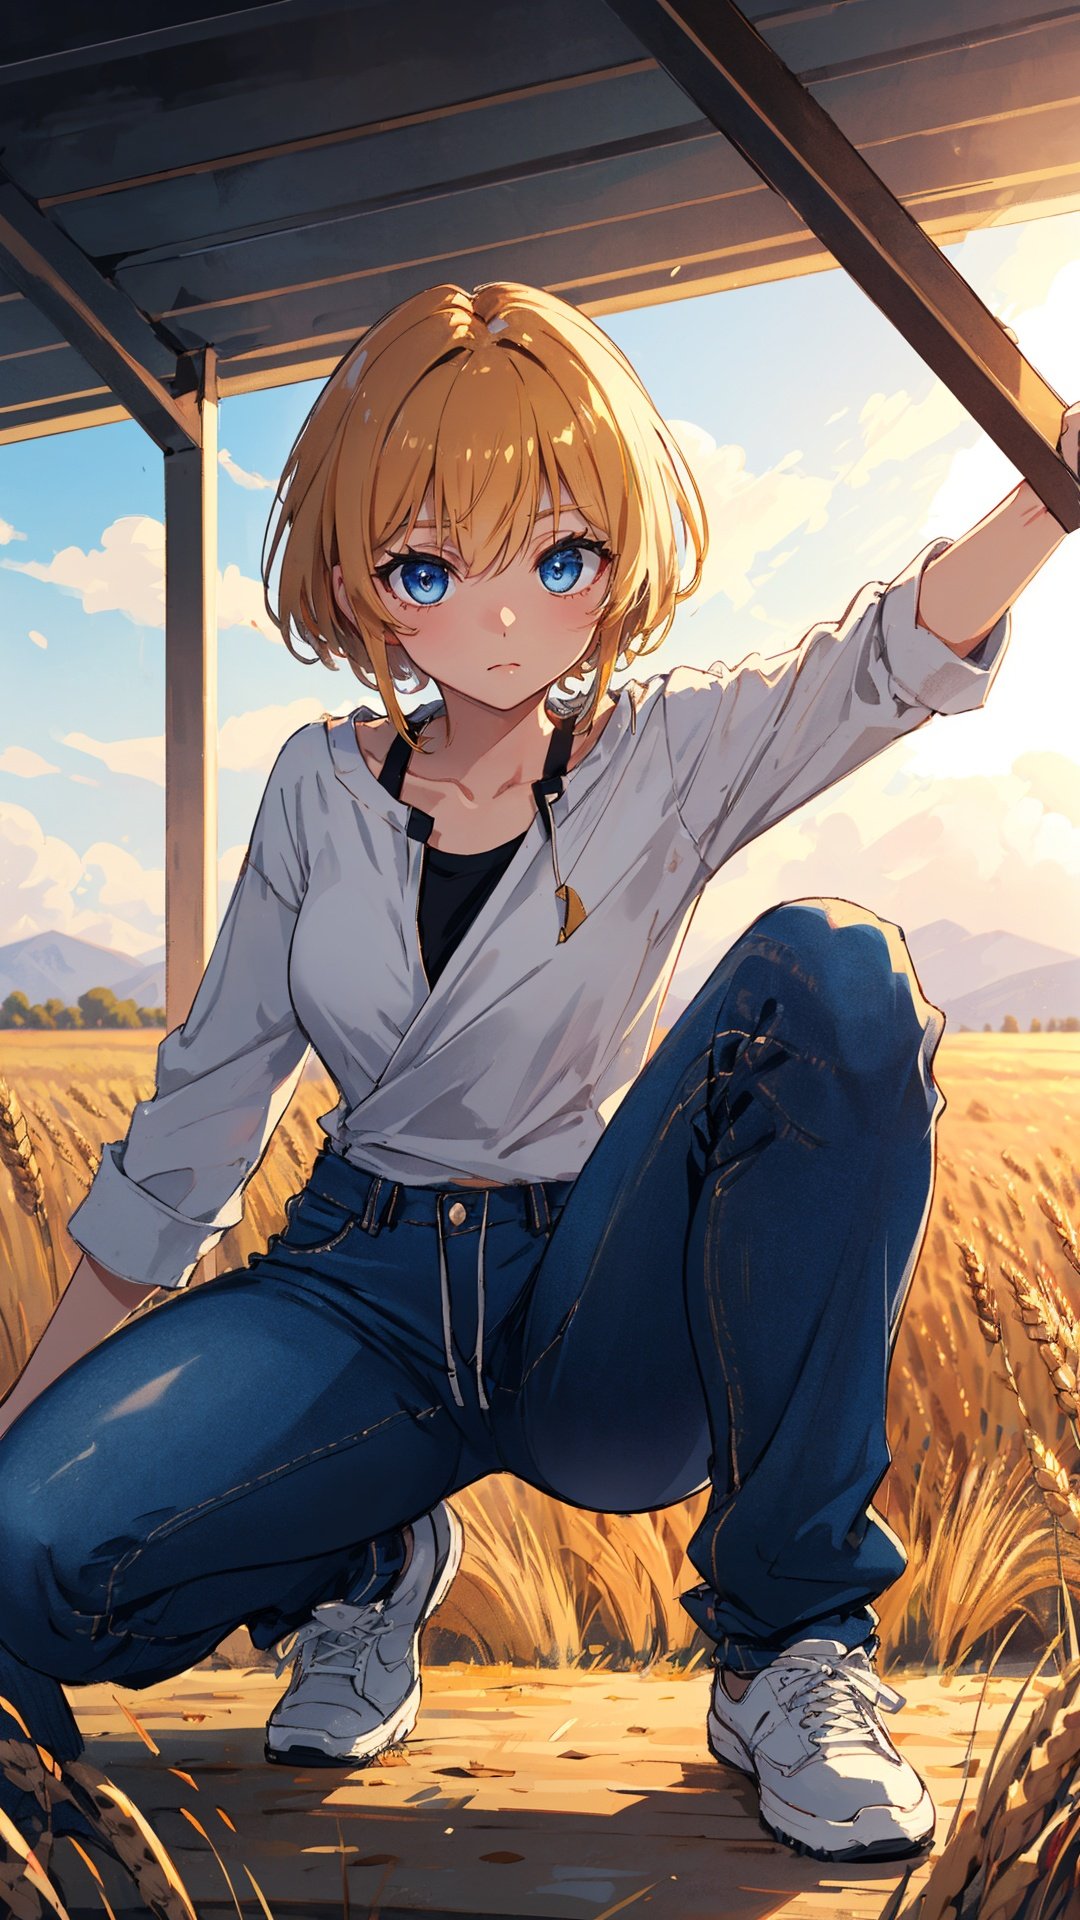 (high quality, best quality, 4k, 2k, (intricate:1.1), (high detail:1.3)), (Golden wheat fields stretching to the horizon, depth of field), (official wallpaper, volumetric lighting, dynamic lighting),
1girl, solo, Tan hair, Powder blue eyes, medium breasts,
Tousled Top with Taper Fade, Wrap-front blouse with a ruffled peplum hem., High-waisted denim jogger pants with a drawstring waist.,
Sarcasm,
looking at viewer, squatting
